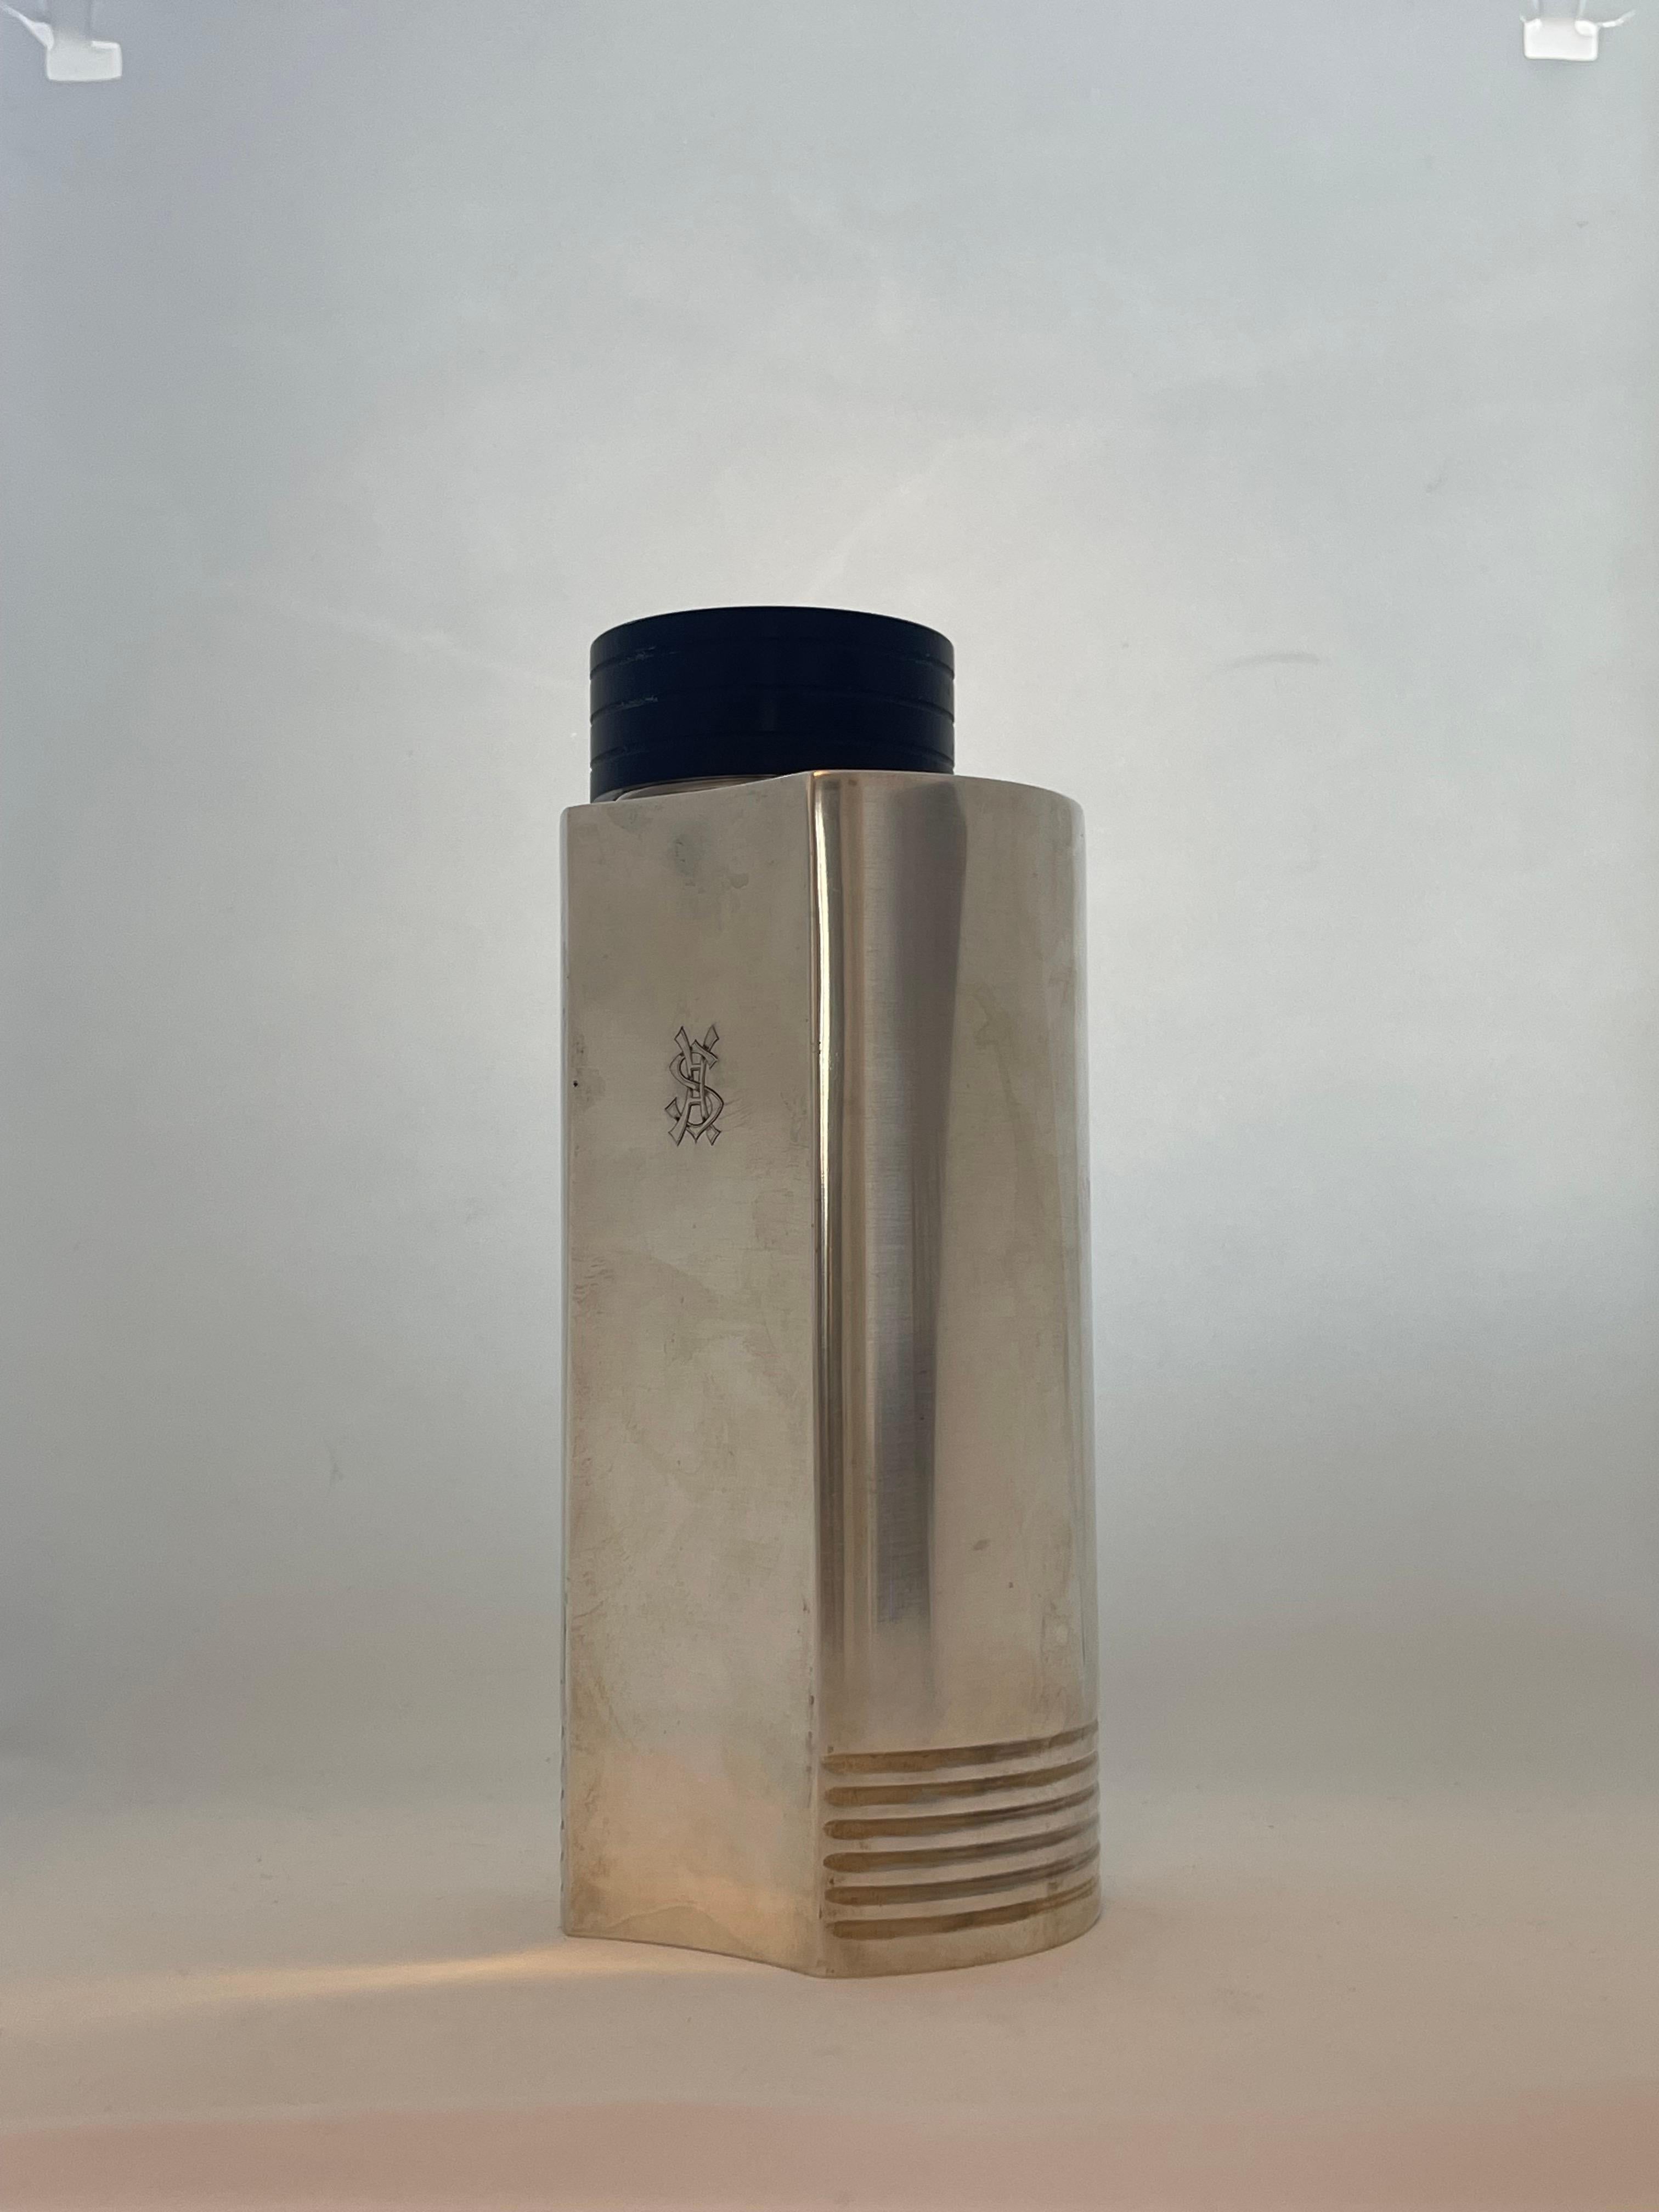 20th Century Cocktail Shaker by Folke Arstrom Silver Plated for Gab Sweden, 1930 For Sale